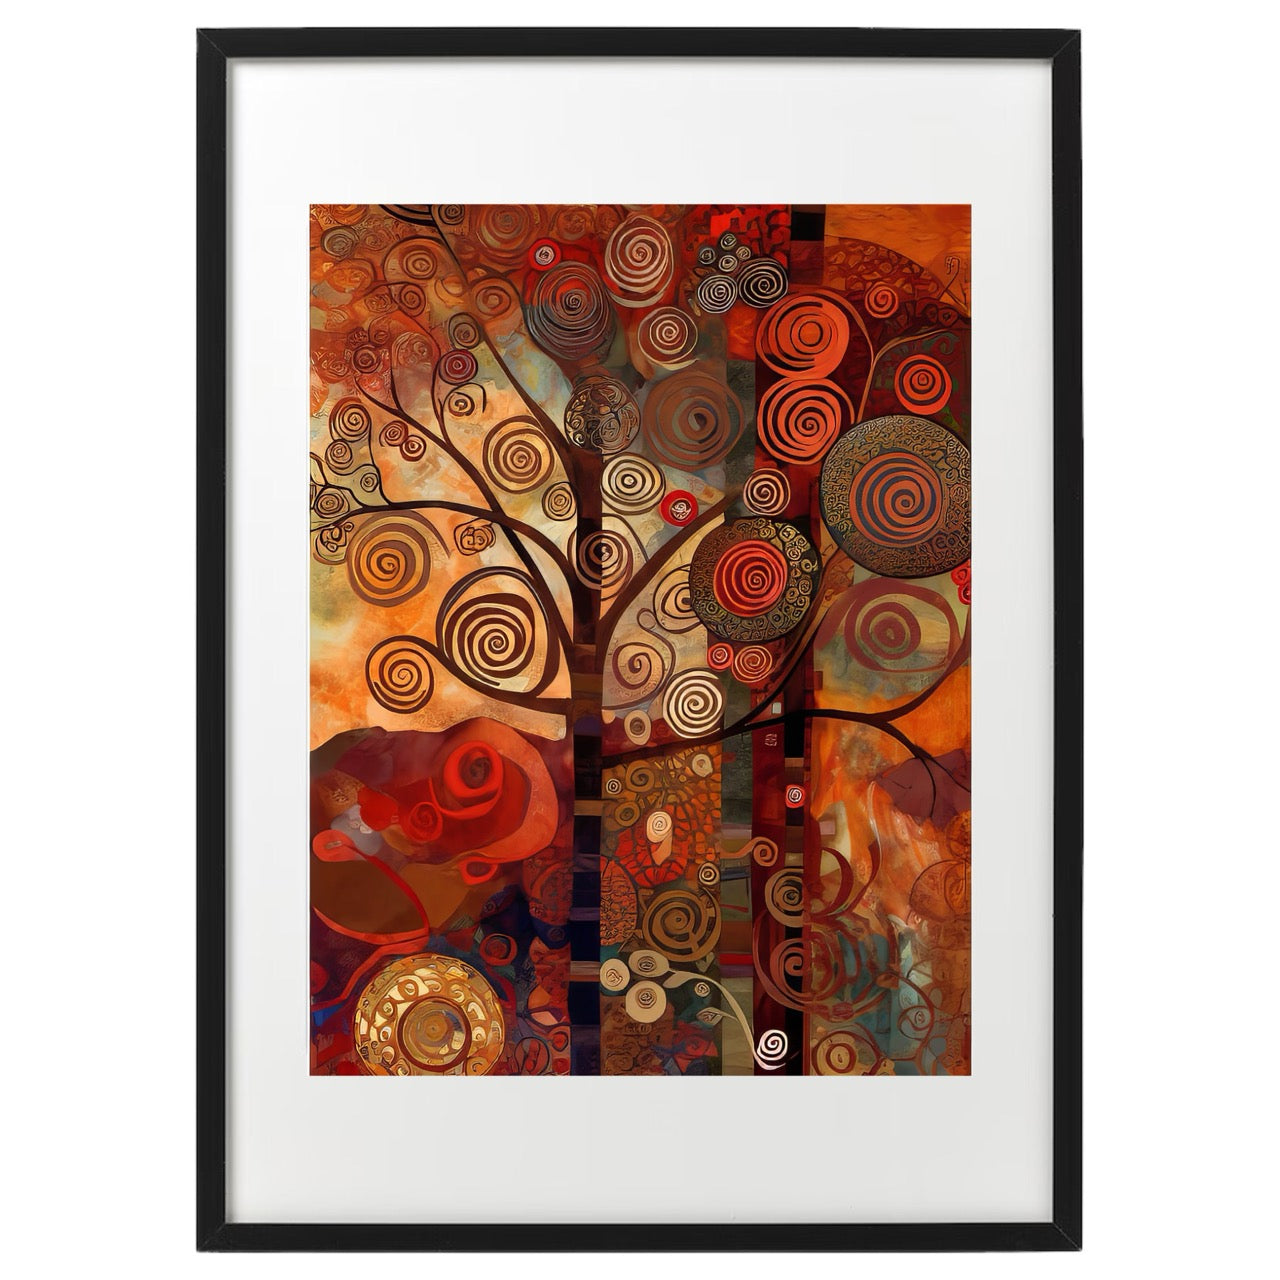 Limited Edition 'Whorls of Wisdom' Art Prints by Lux Label Labs - Exclusive Collection